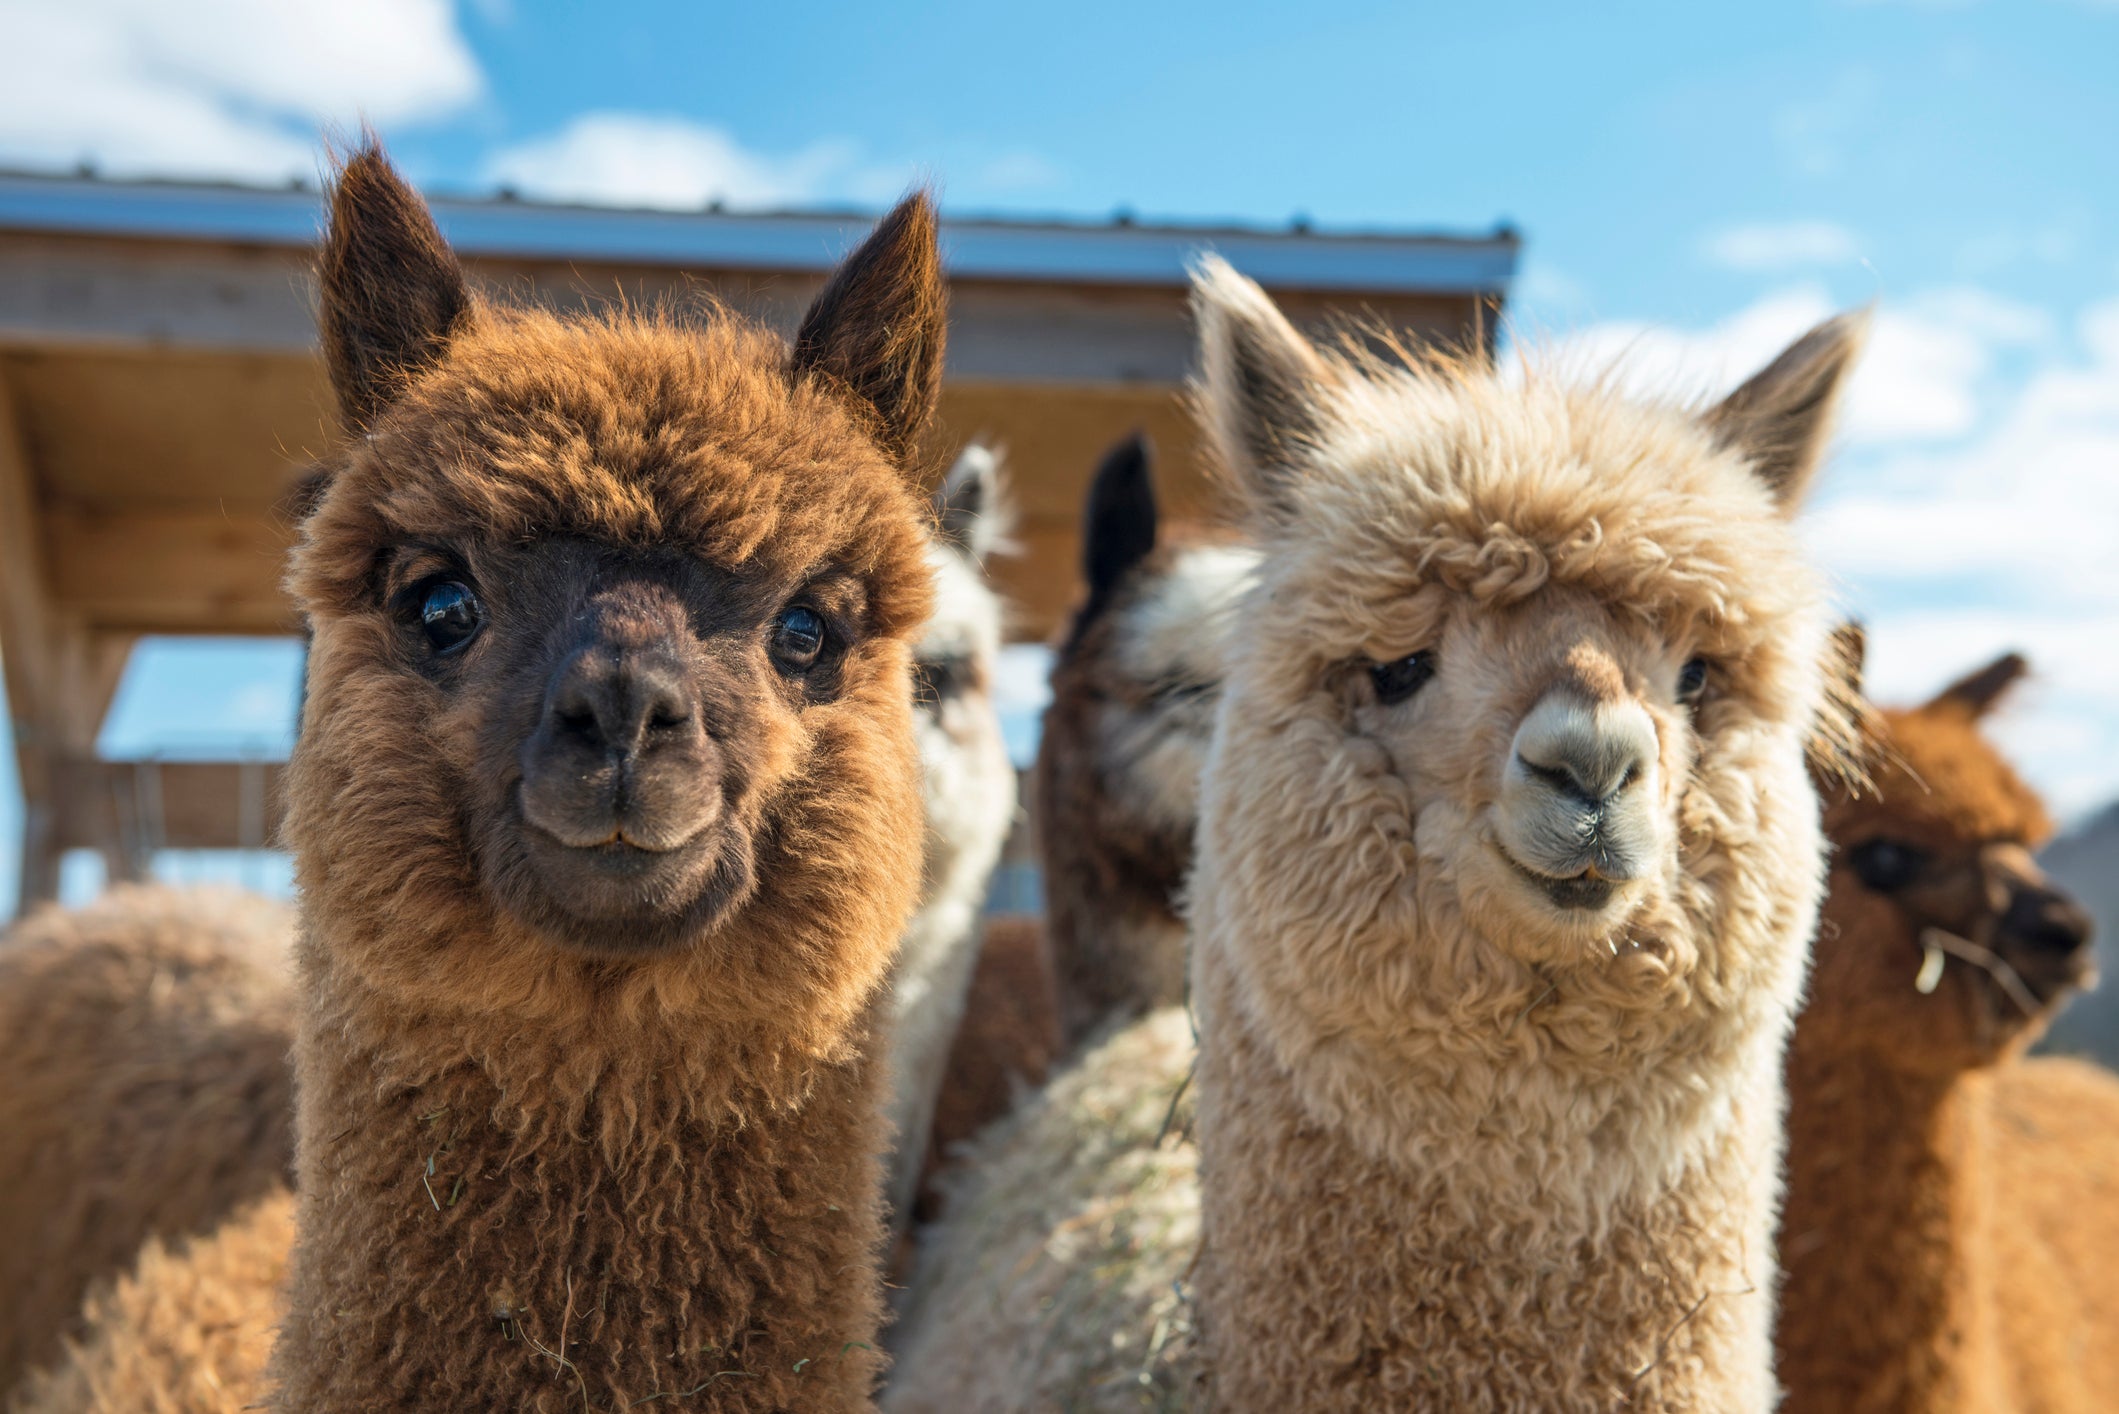 A Vermont man stands accused spending fraudulent coronavirus relief loans on alpacas, among other things.